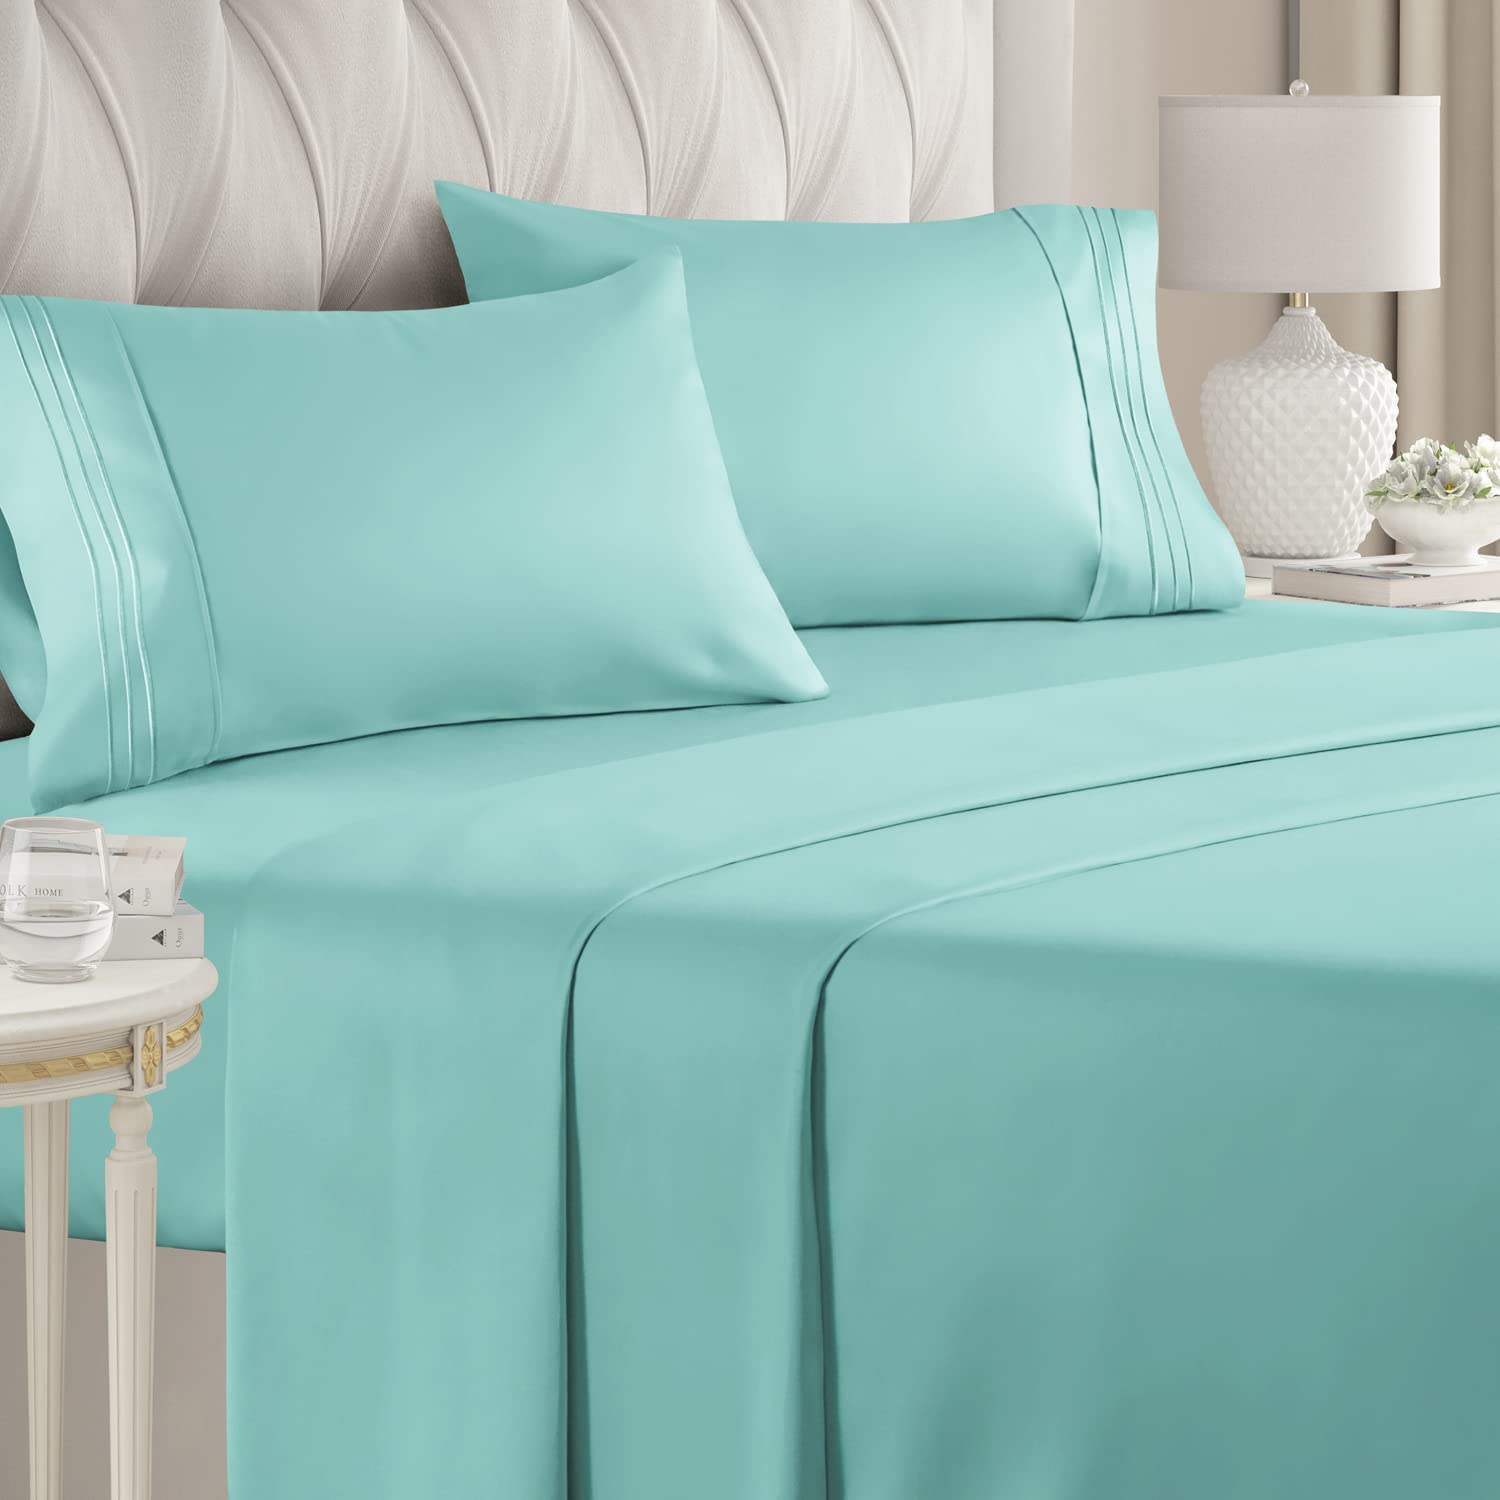 Buy Full Size Flat Sheet Aqua Blue Egyptian Cotton 1000 Thread Count at- Egyptianhomelinens.com